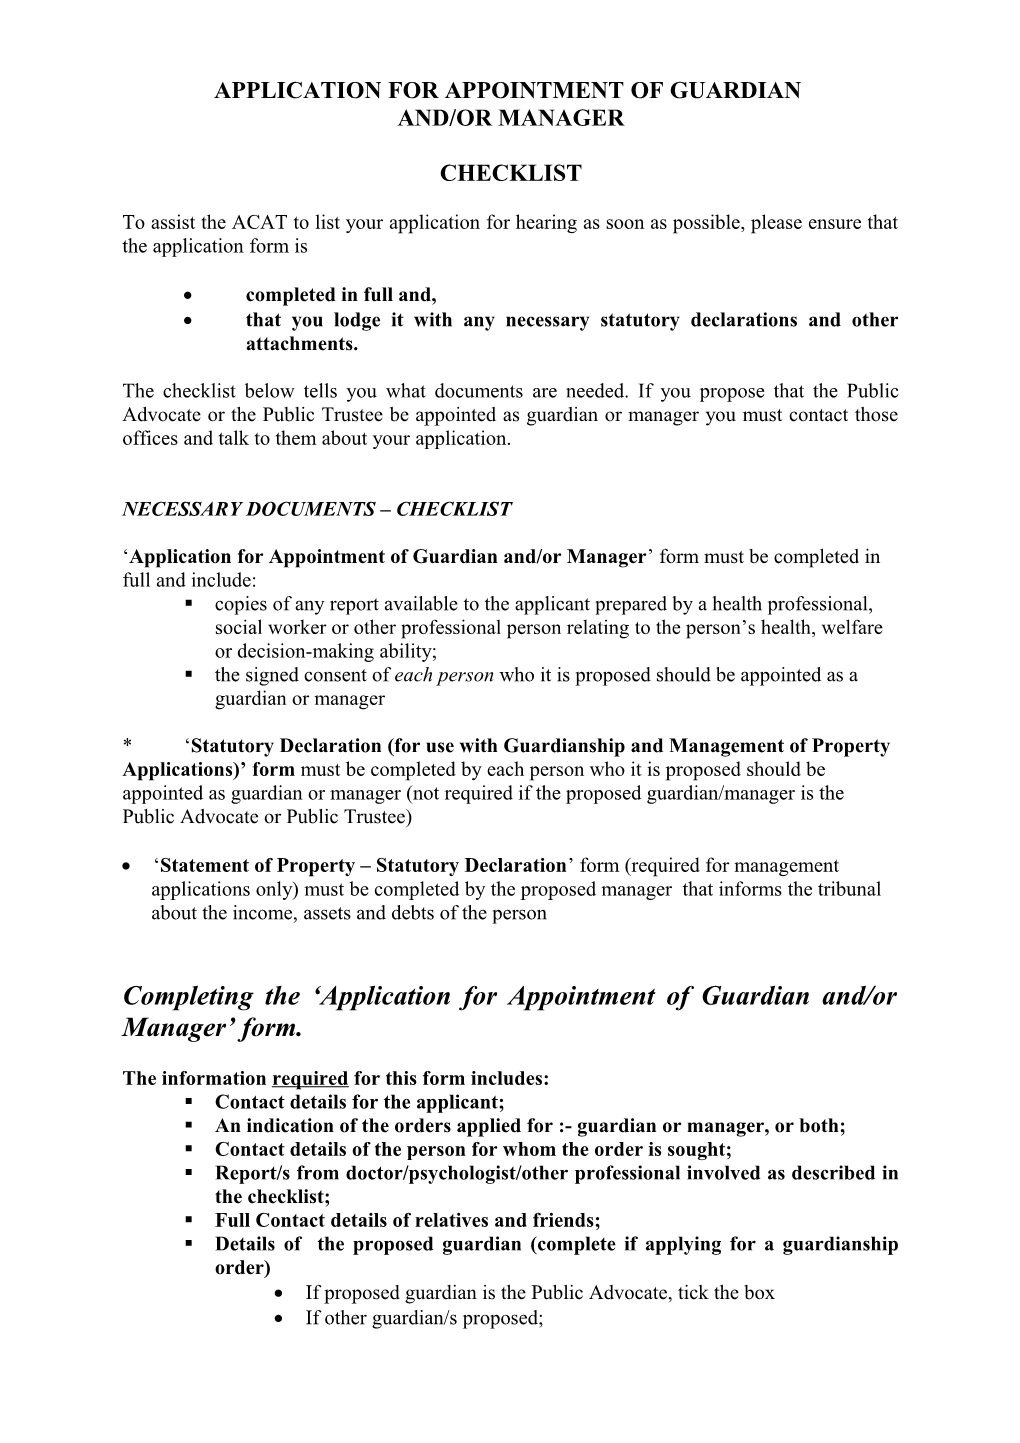 Application for Appointment of Guardian